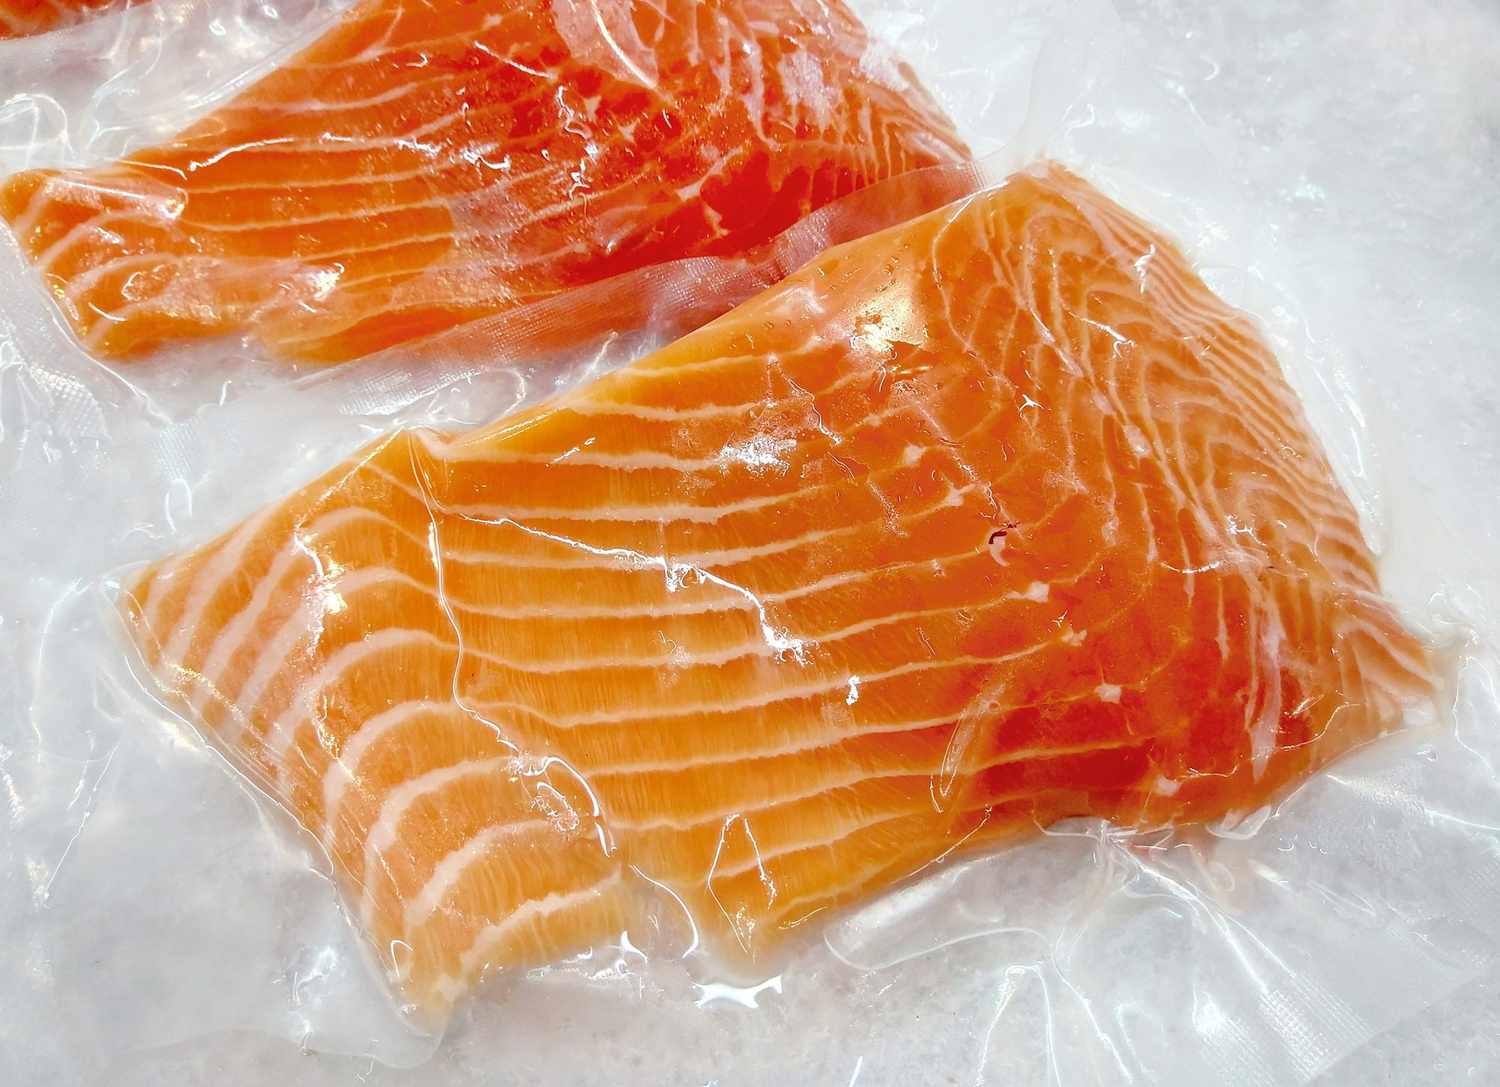 Why You Should Pretty Much Always Buy Frozen Fish